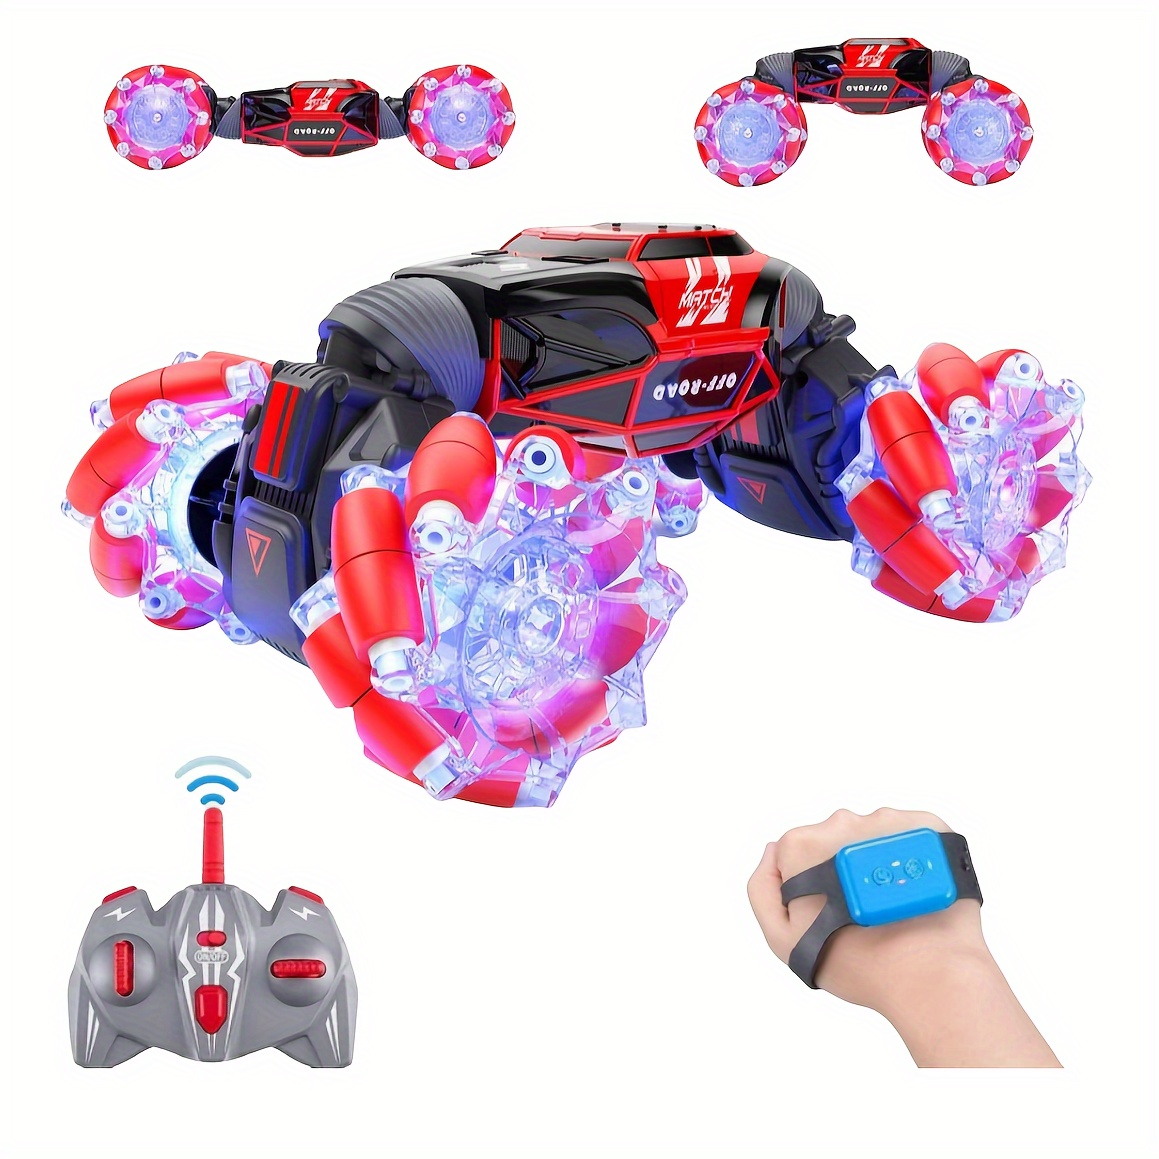  OrrenteRemote RC Cars, Remote Control Car with Wheel Lights and  Headlights, Double Sided 360° Rotating RC Car, 4WD RC Truck for 6 Year Old  Boy Gifts 2.4Ghz Stunt Kids Toy Car